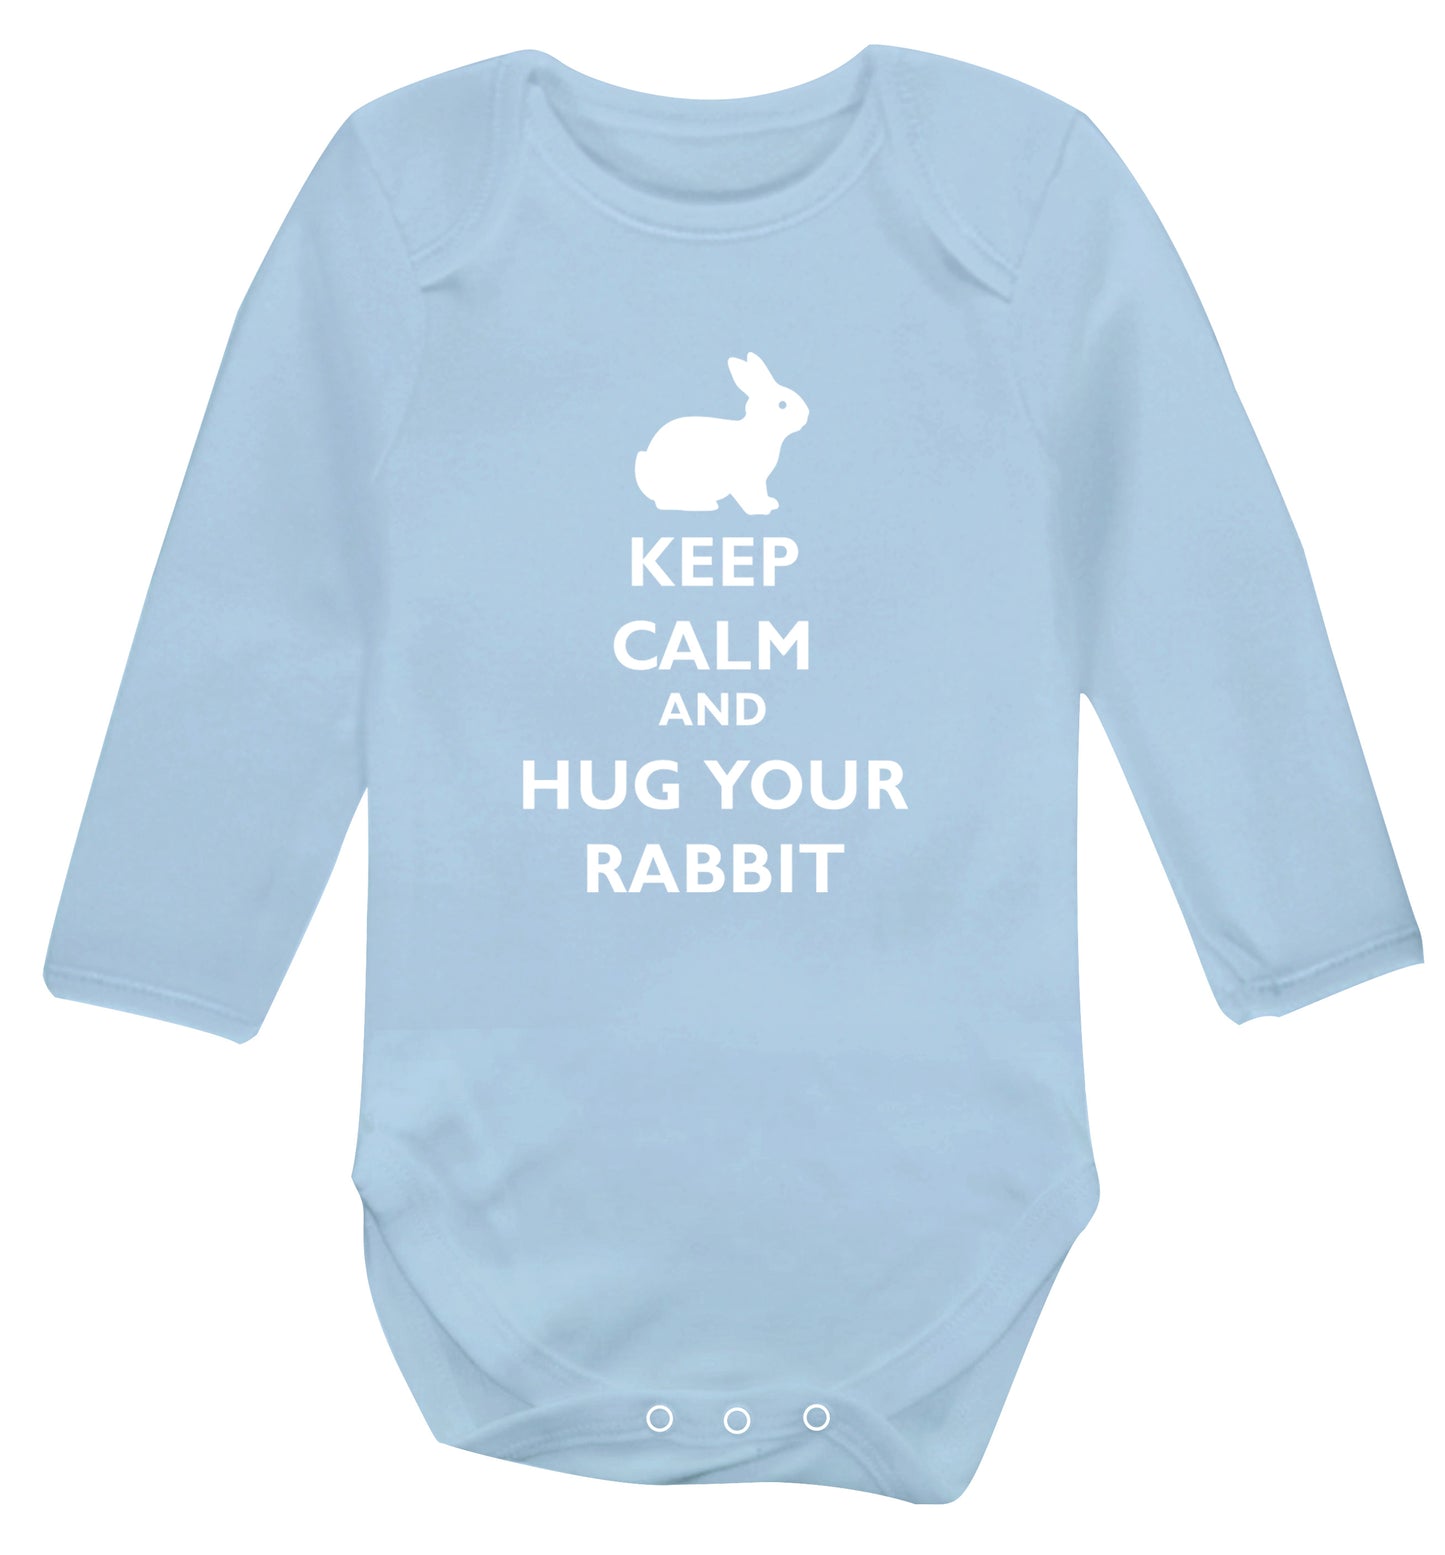 Keep calm and hug your rabbit Baby Vest long sleeved pale blue 6-12 months